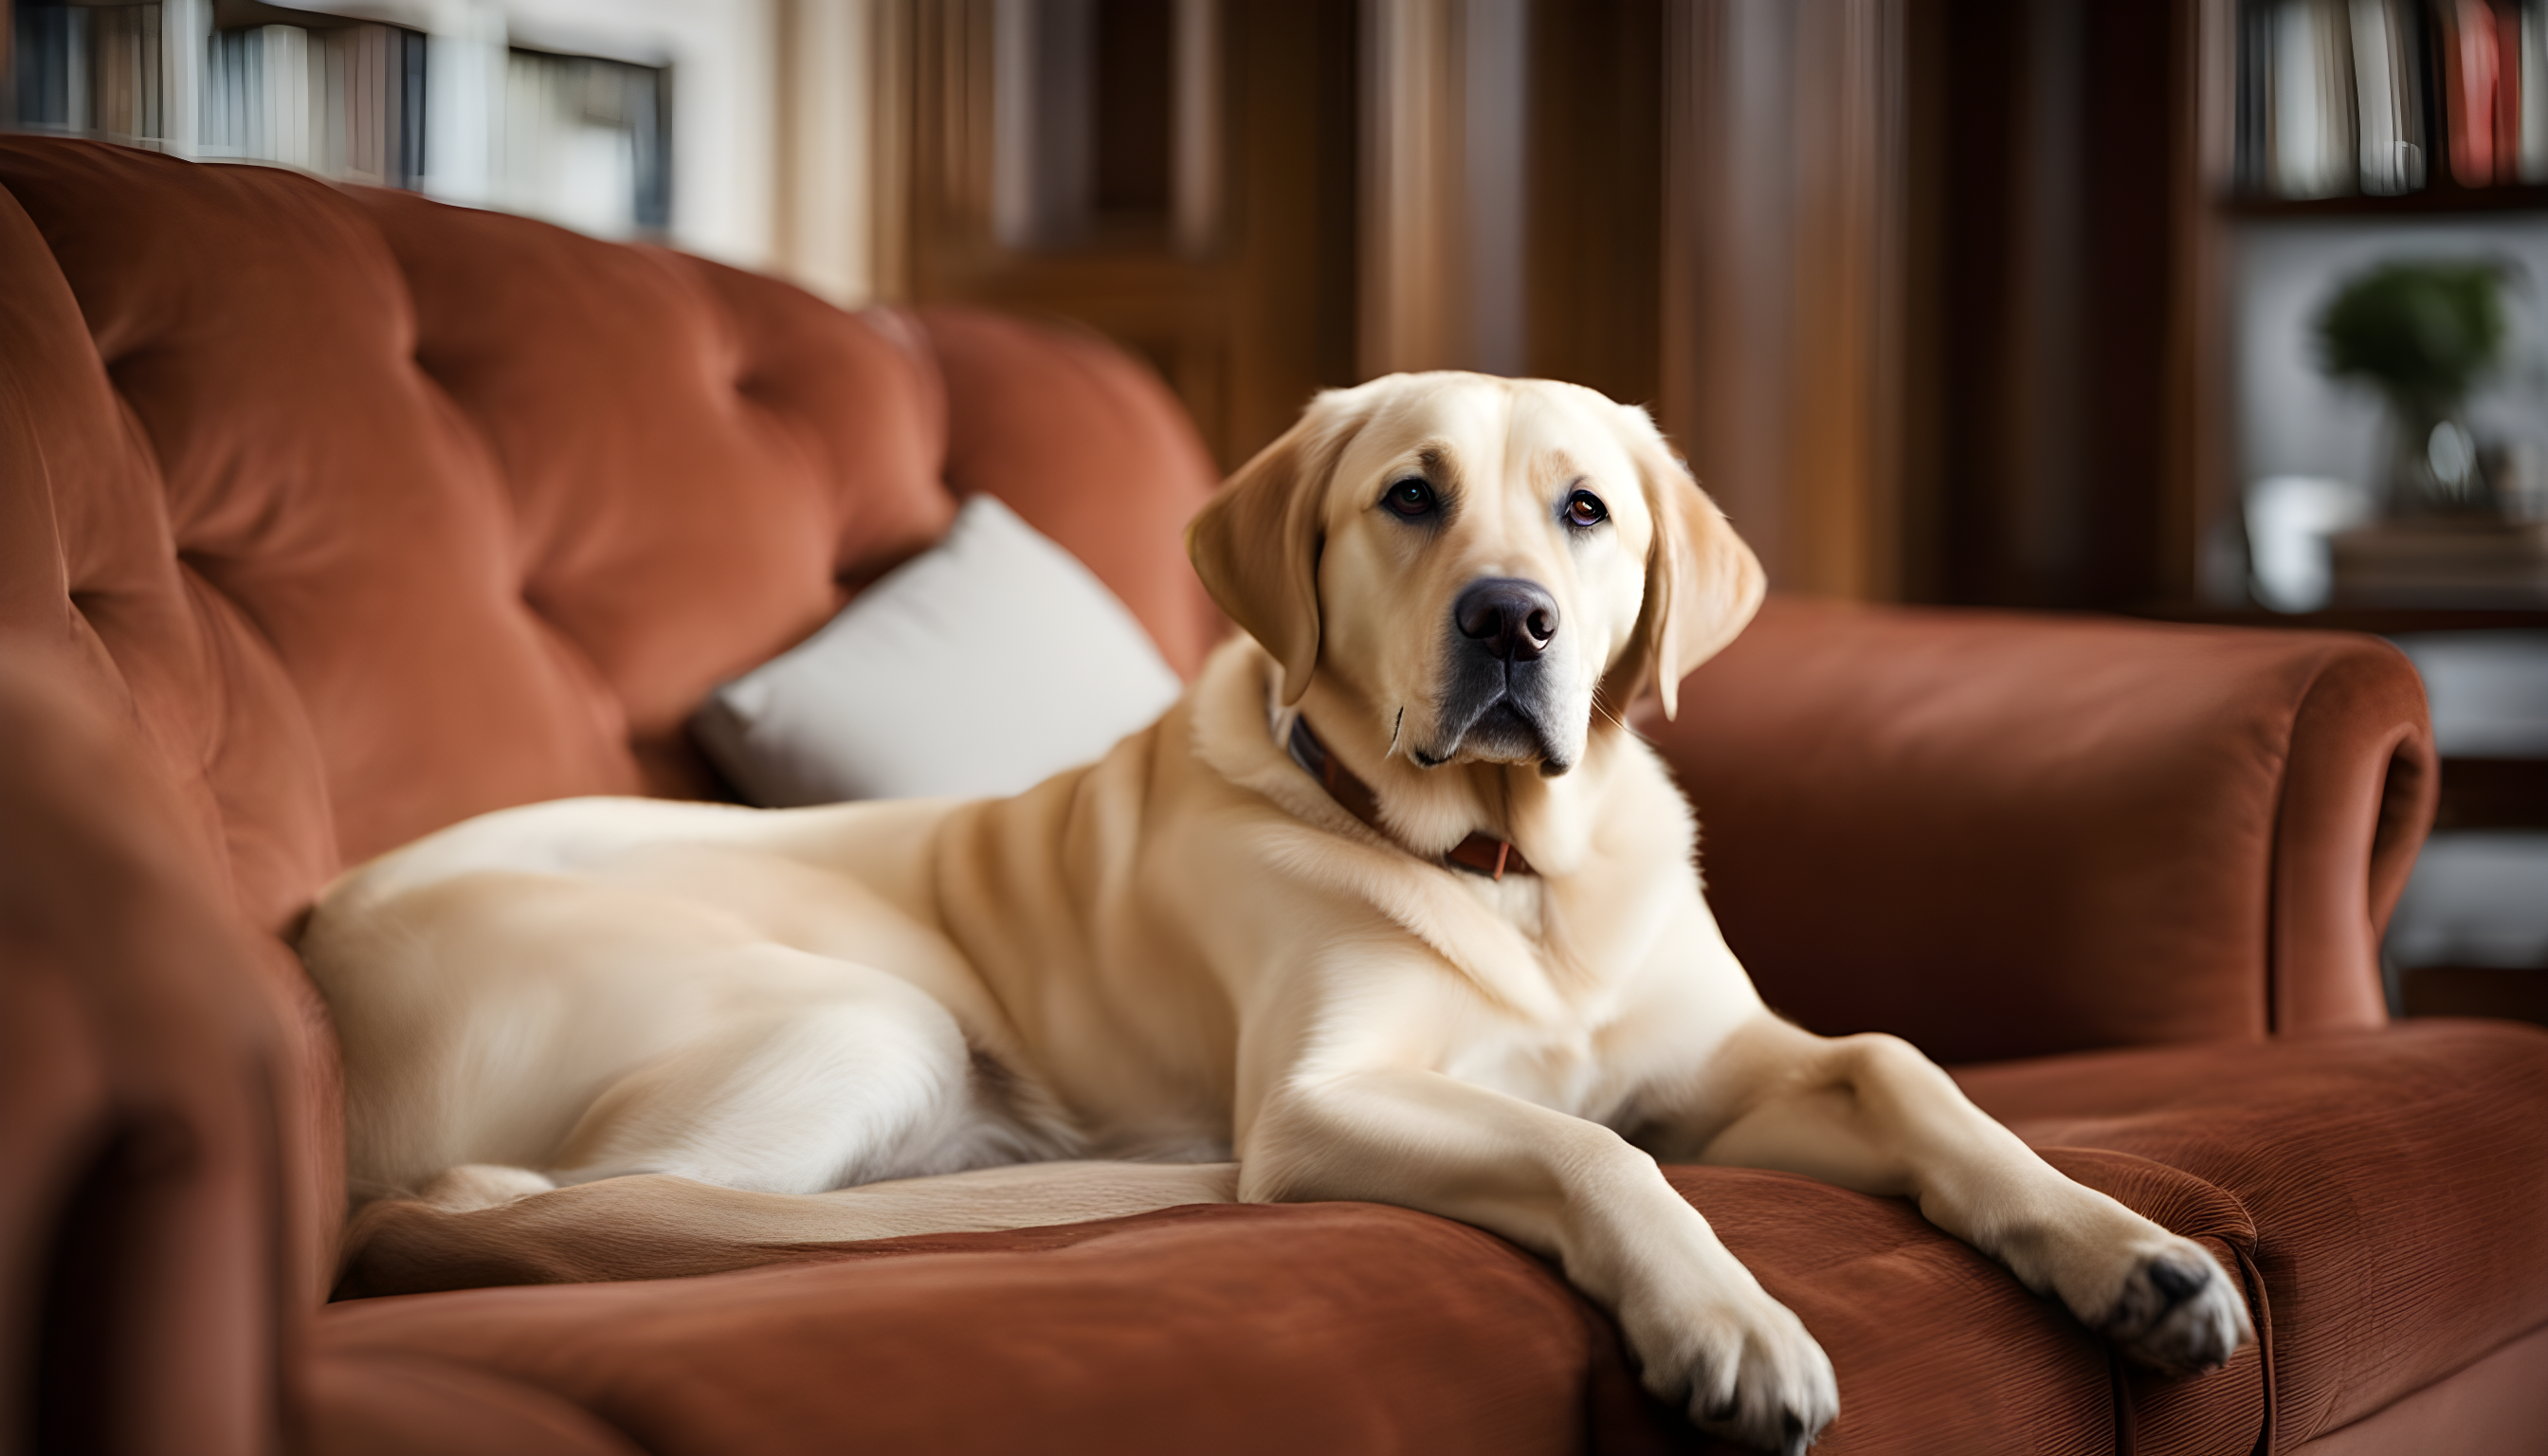 British Lab lounging on a sofa, showing off its cool, calm demeanor.